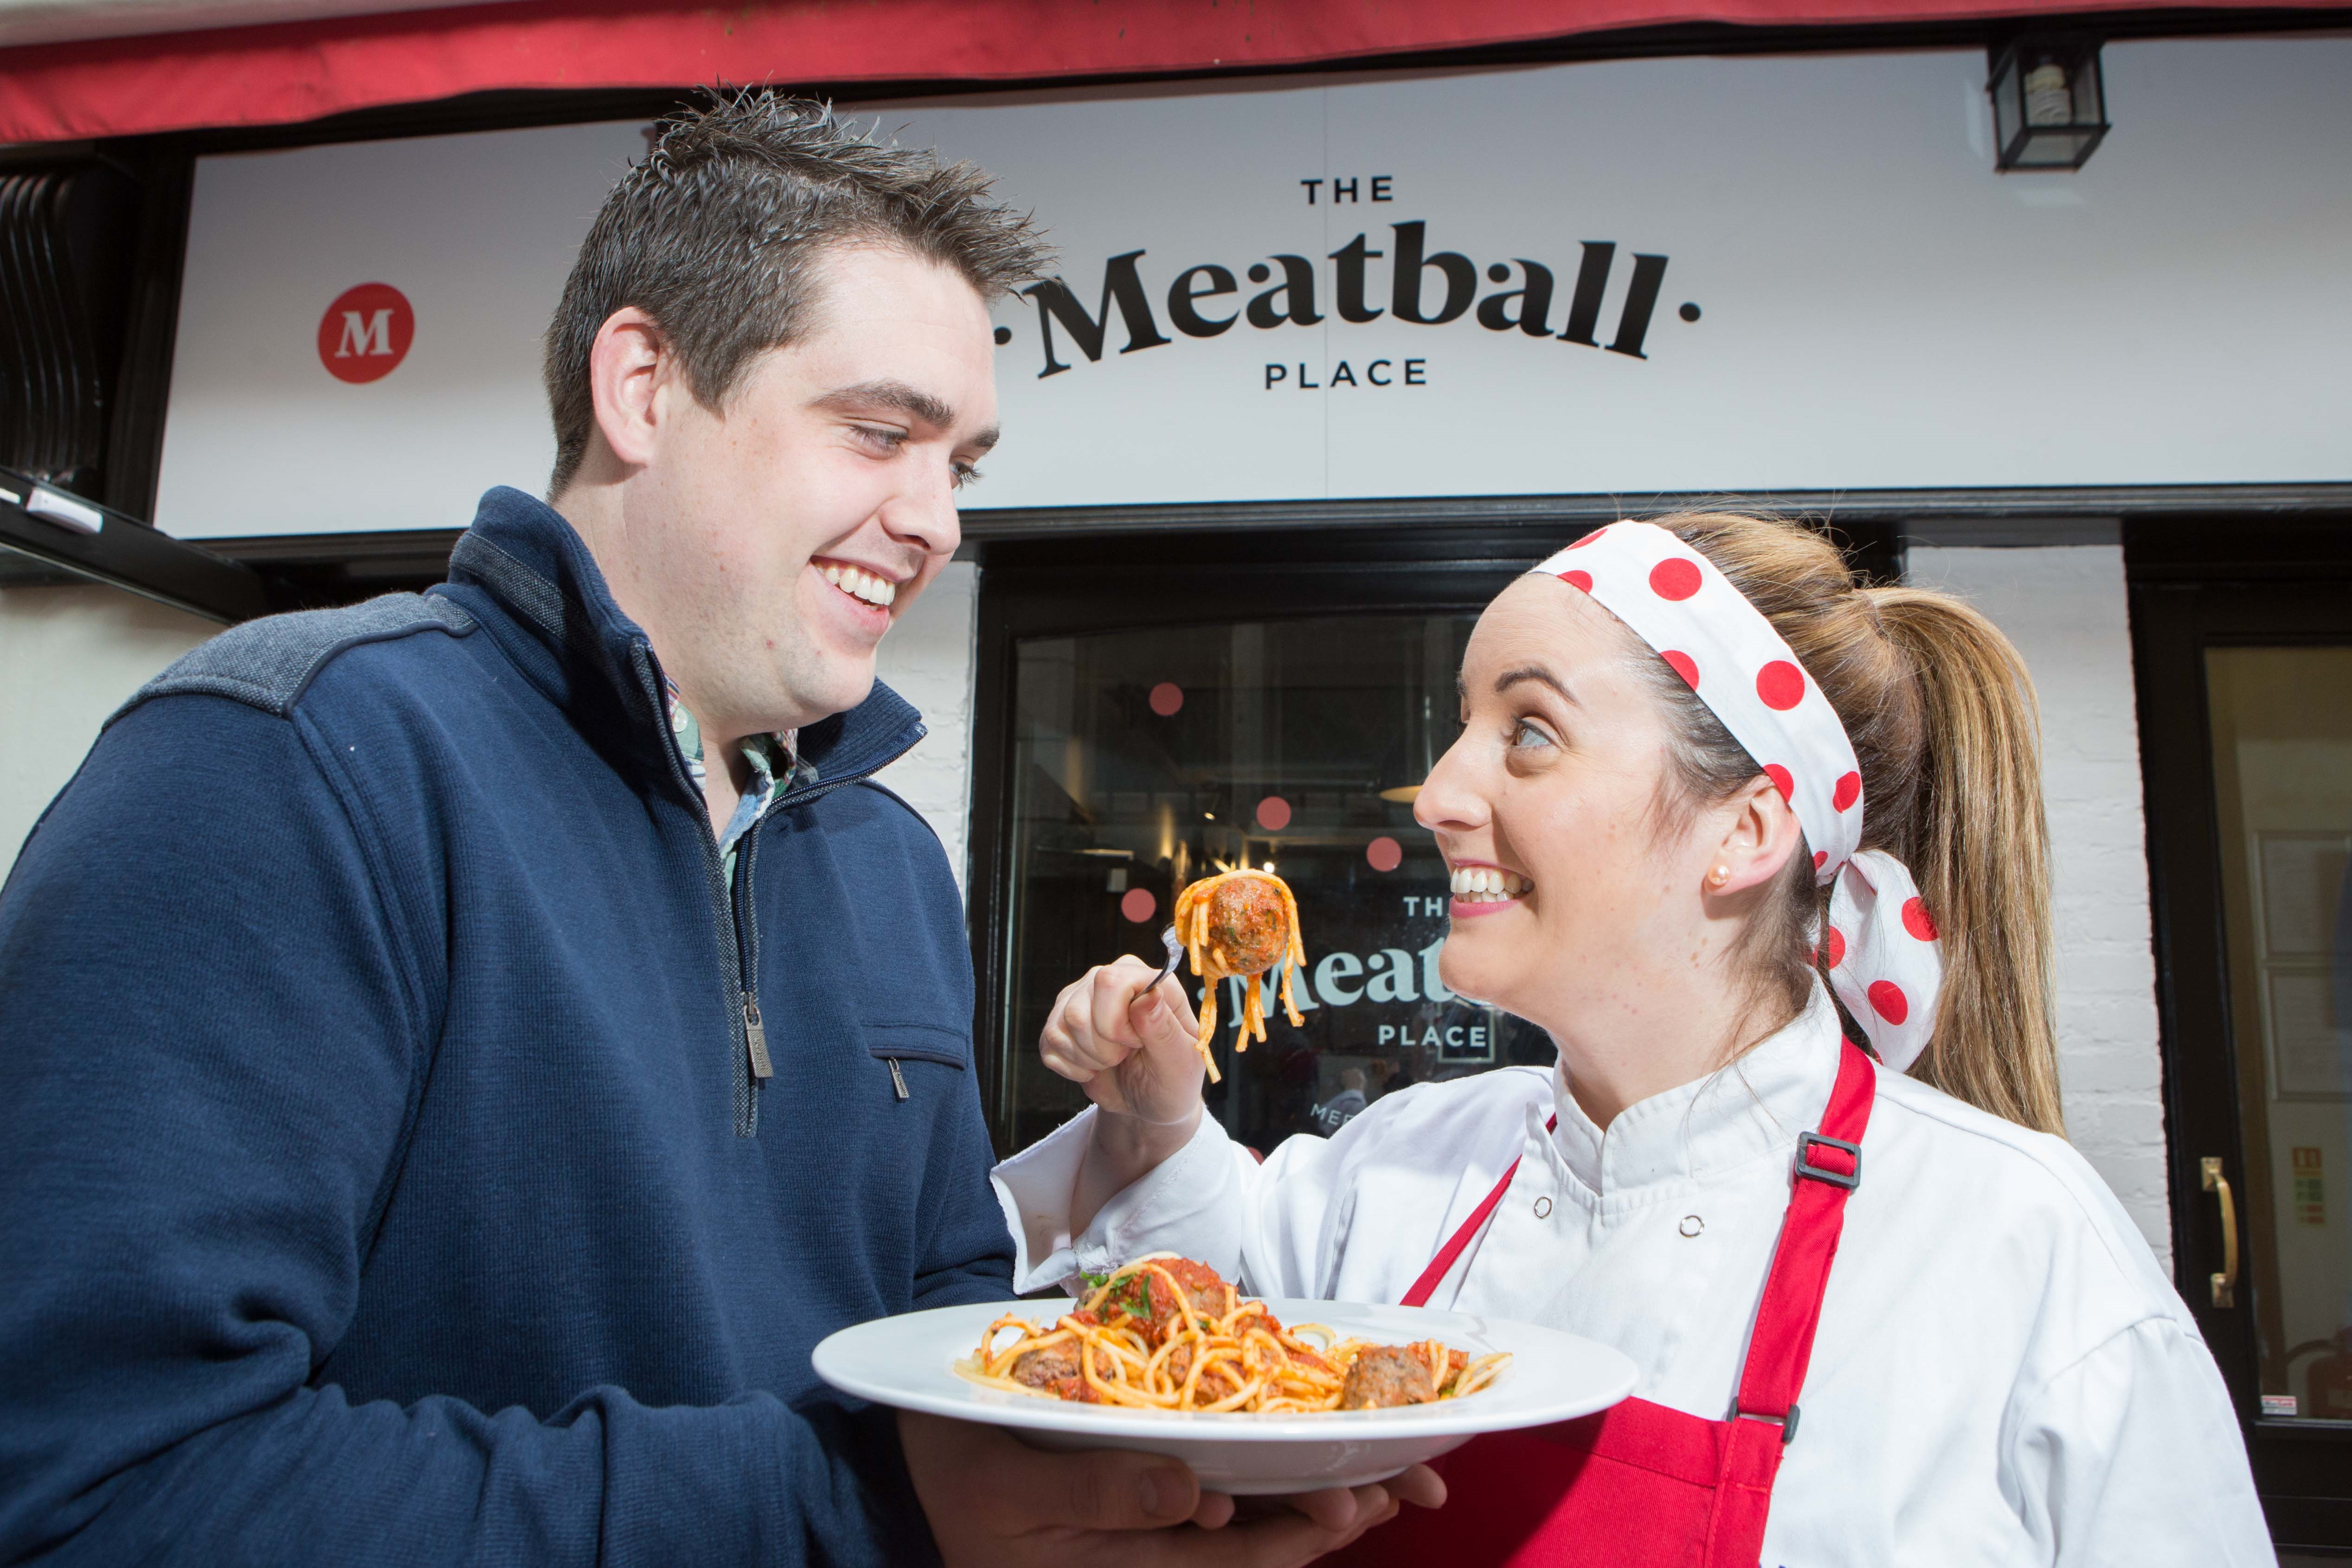 DKANE 17/11/2015 REPRO FREE Ireland’s first meatball restaurant opens its doors in Cork! Pictured at the launch of The Meatball Place are owner Tony Costello and owner and chef, Cork-born Grainne Holland. The dynamic young couple are bringing a completely new dining experience to Cork, with a menu inspired by the humble meatball. The Meatball Place, located on 8-9 Carey's Lane is open seven days a week from 12noon to 10pm daily, with a separate mouth-watering brunch menu available from 11am to 4pm on Saturday and Sunday.Check out what tasty treats are in store for you via the online menu at www.themeatballplace.ie or visit Facebook/TheMeatballPlace and Twitter/@MeatballPlace for special offers and news. Pic Darragh Kane.